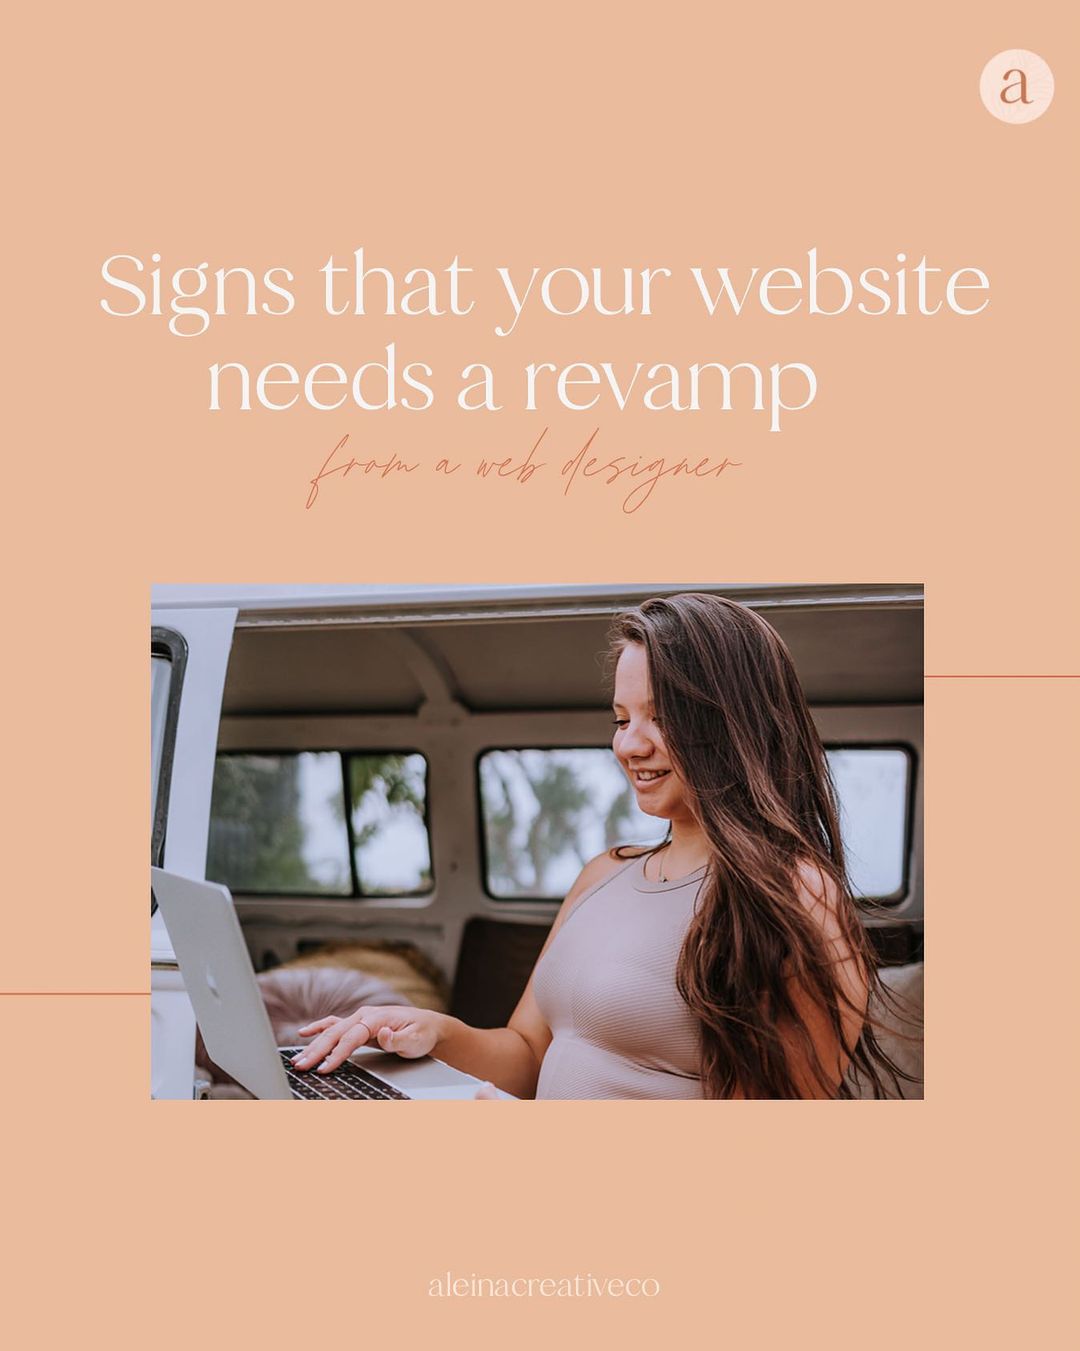 When is it time to redesign my website?